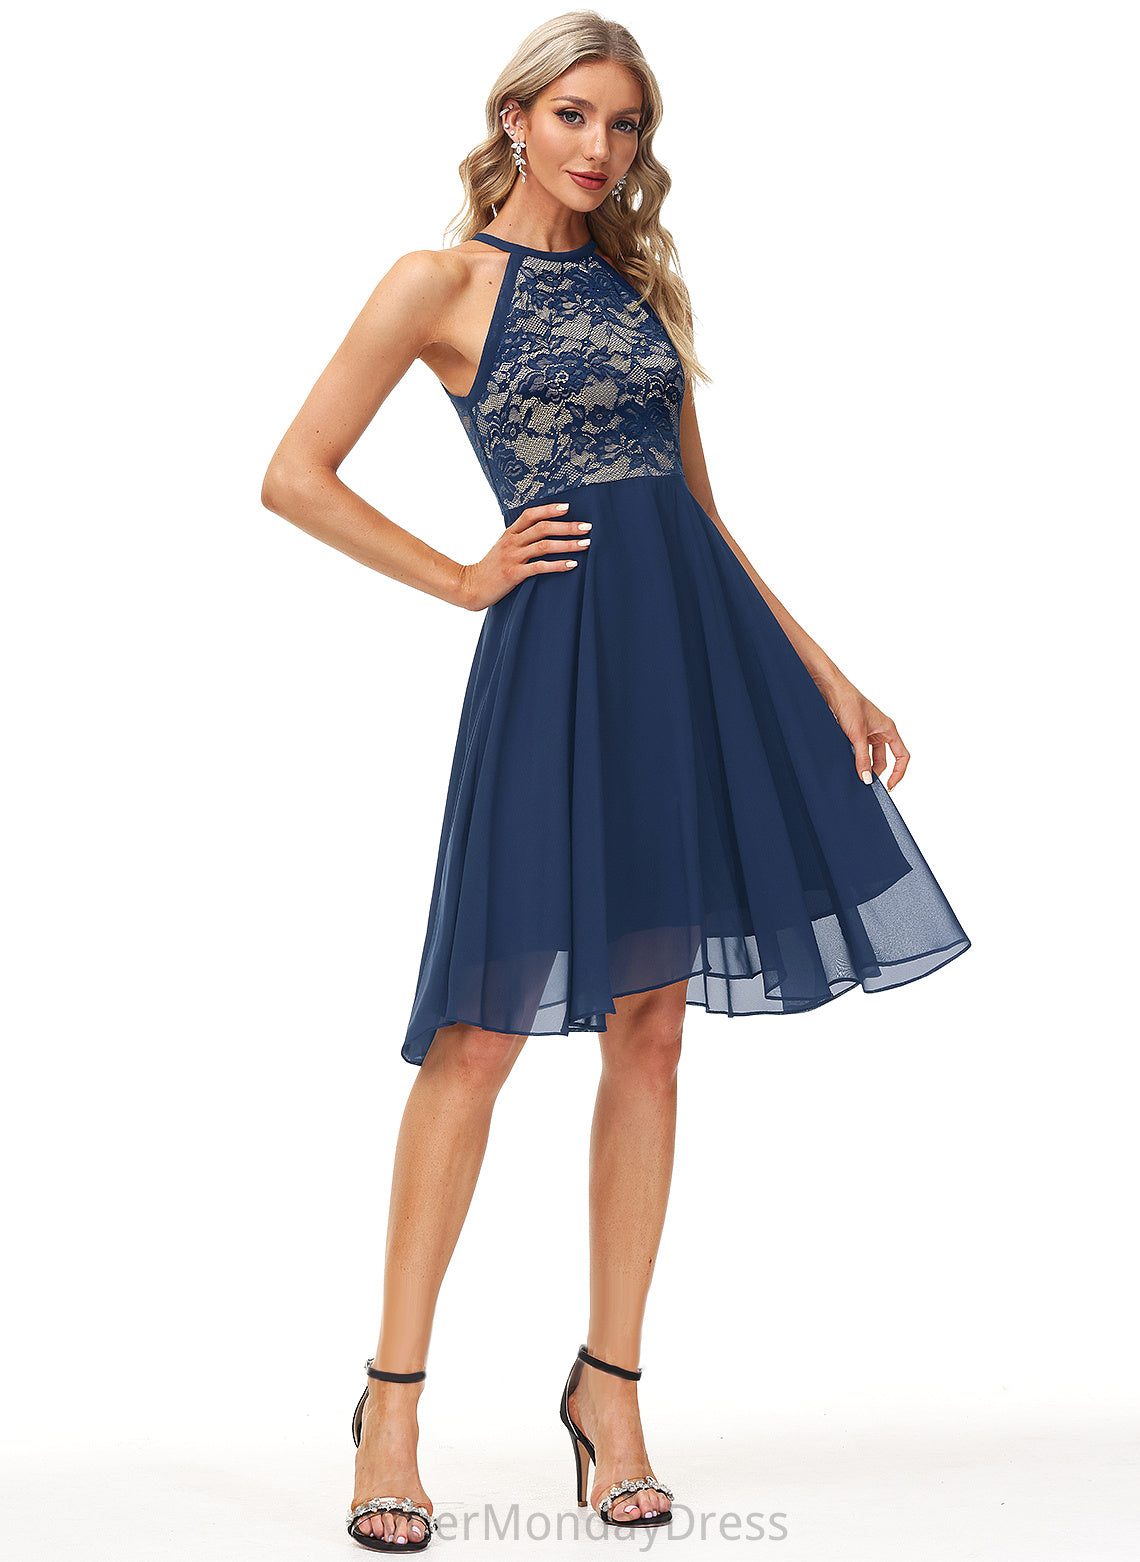 Lace Knee-Length Cocktail Dresses Ruth Scoop With Neck Chiffon Dress A-Line Cocktail